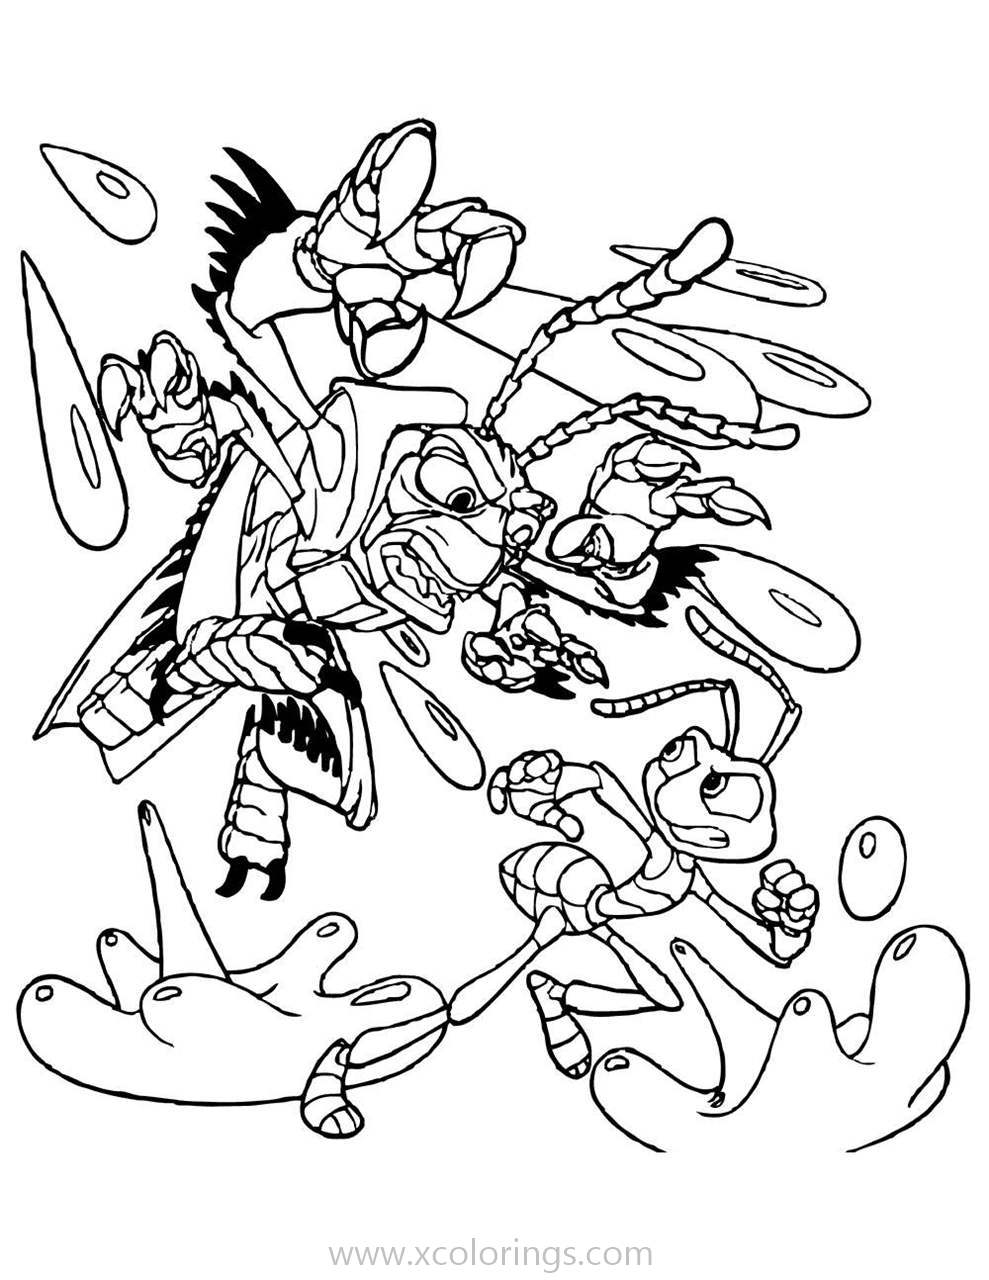 Free A Bugs Life Coloring Pages Hopper Fighting Flick printable